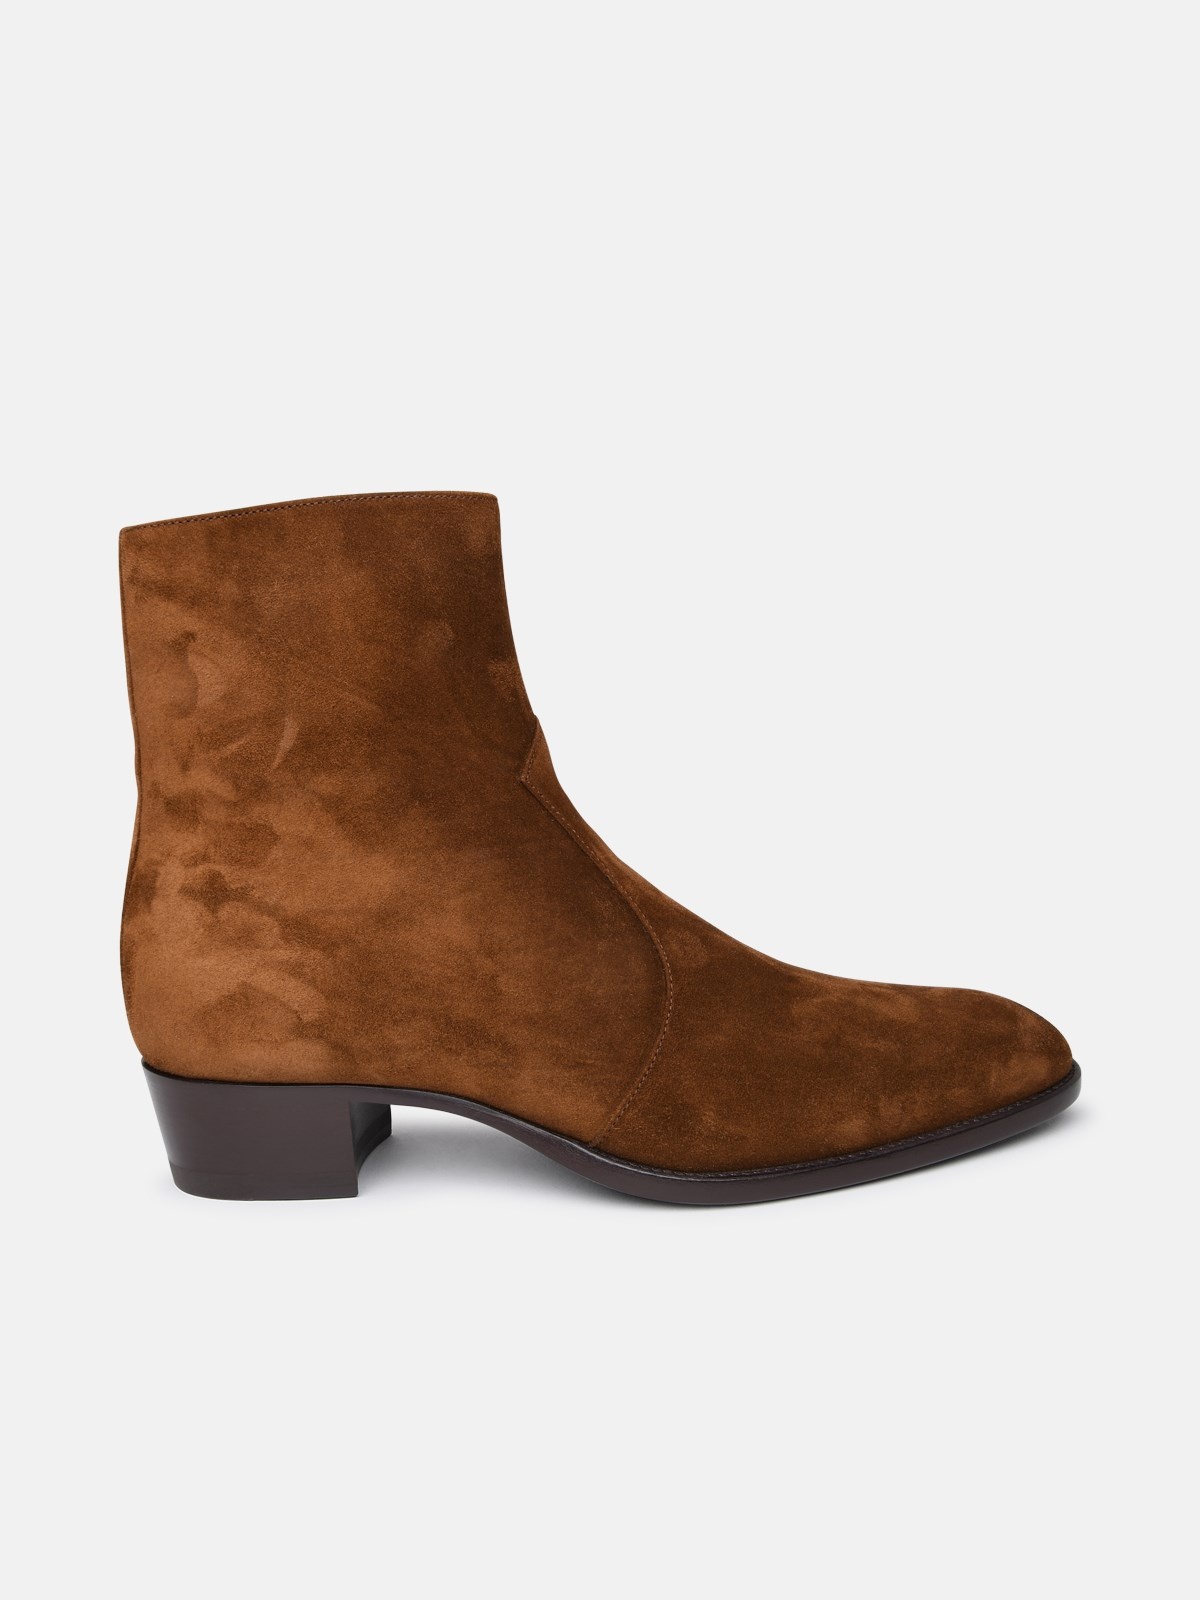 Wyatt brown suede ankle boots - 1